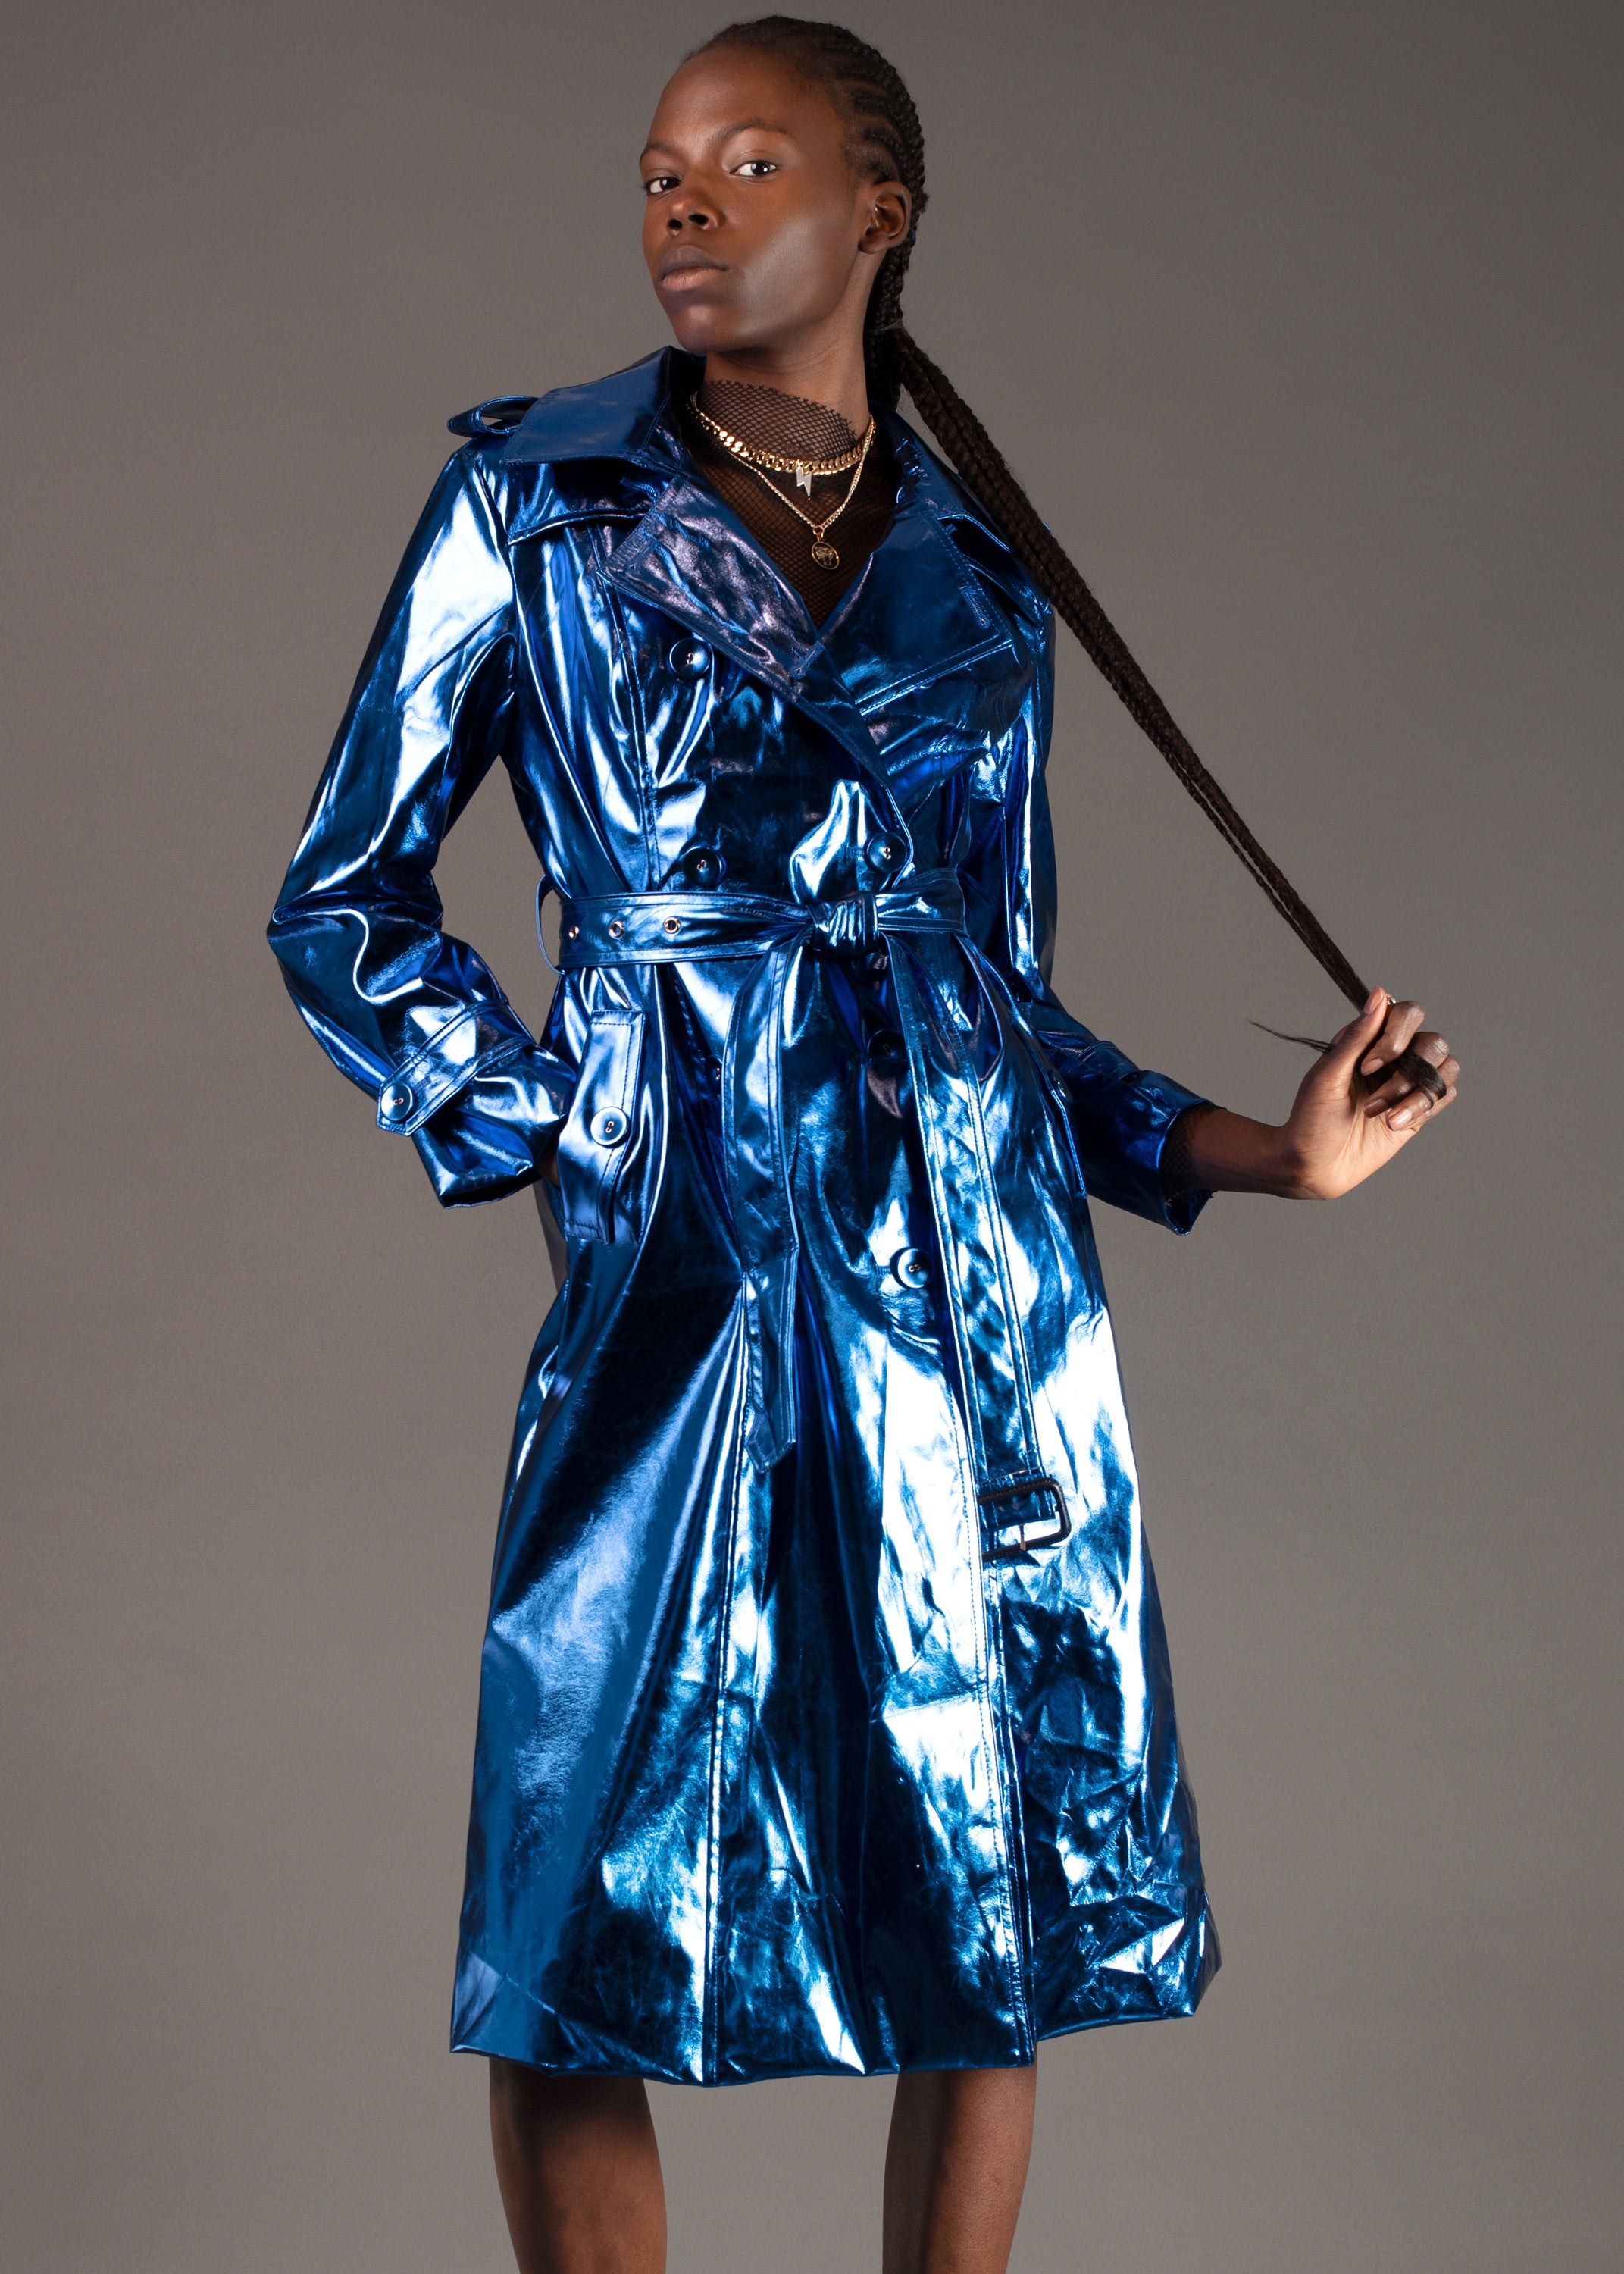 Hot Blue Metallic Trench Outerwear Kate Hewko 